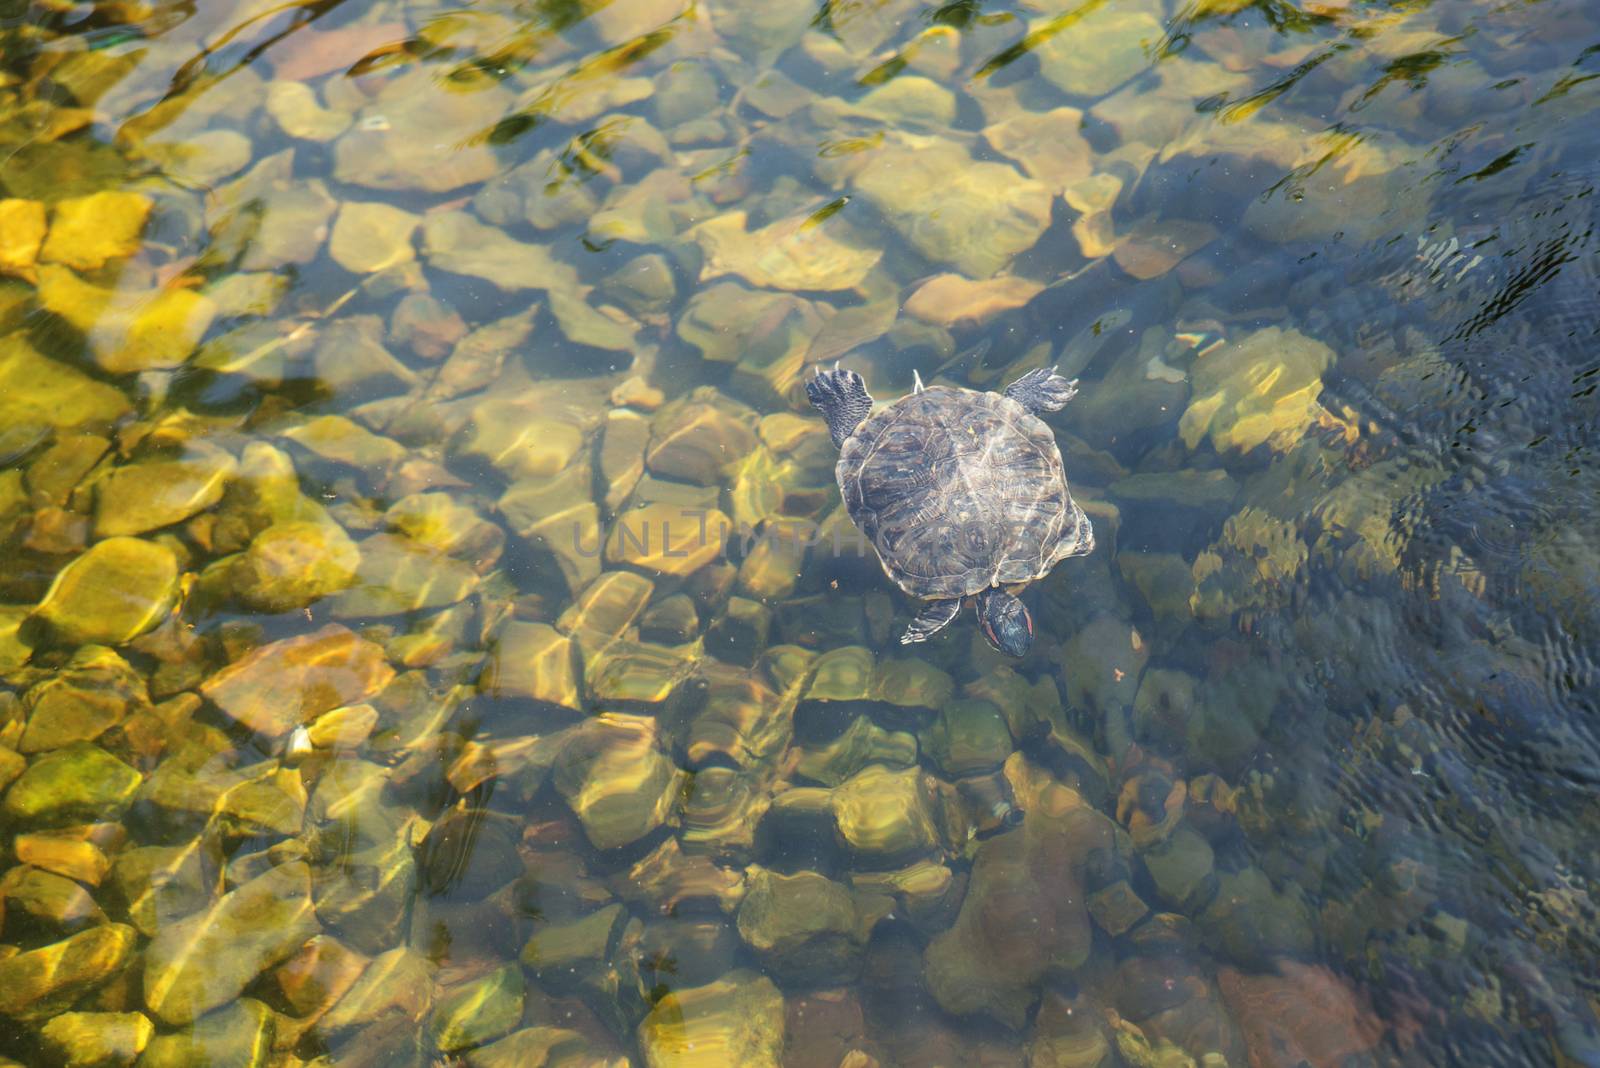 Turtle swims in transparent water by Epitavi